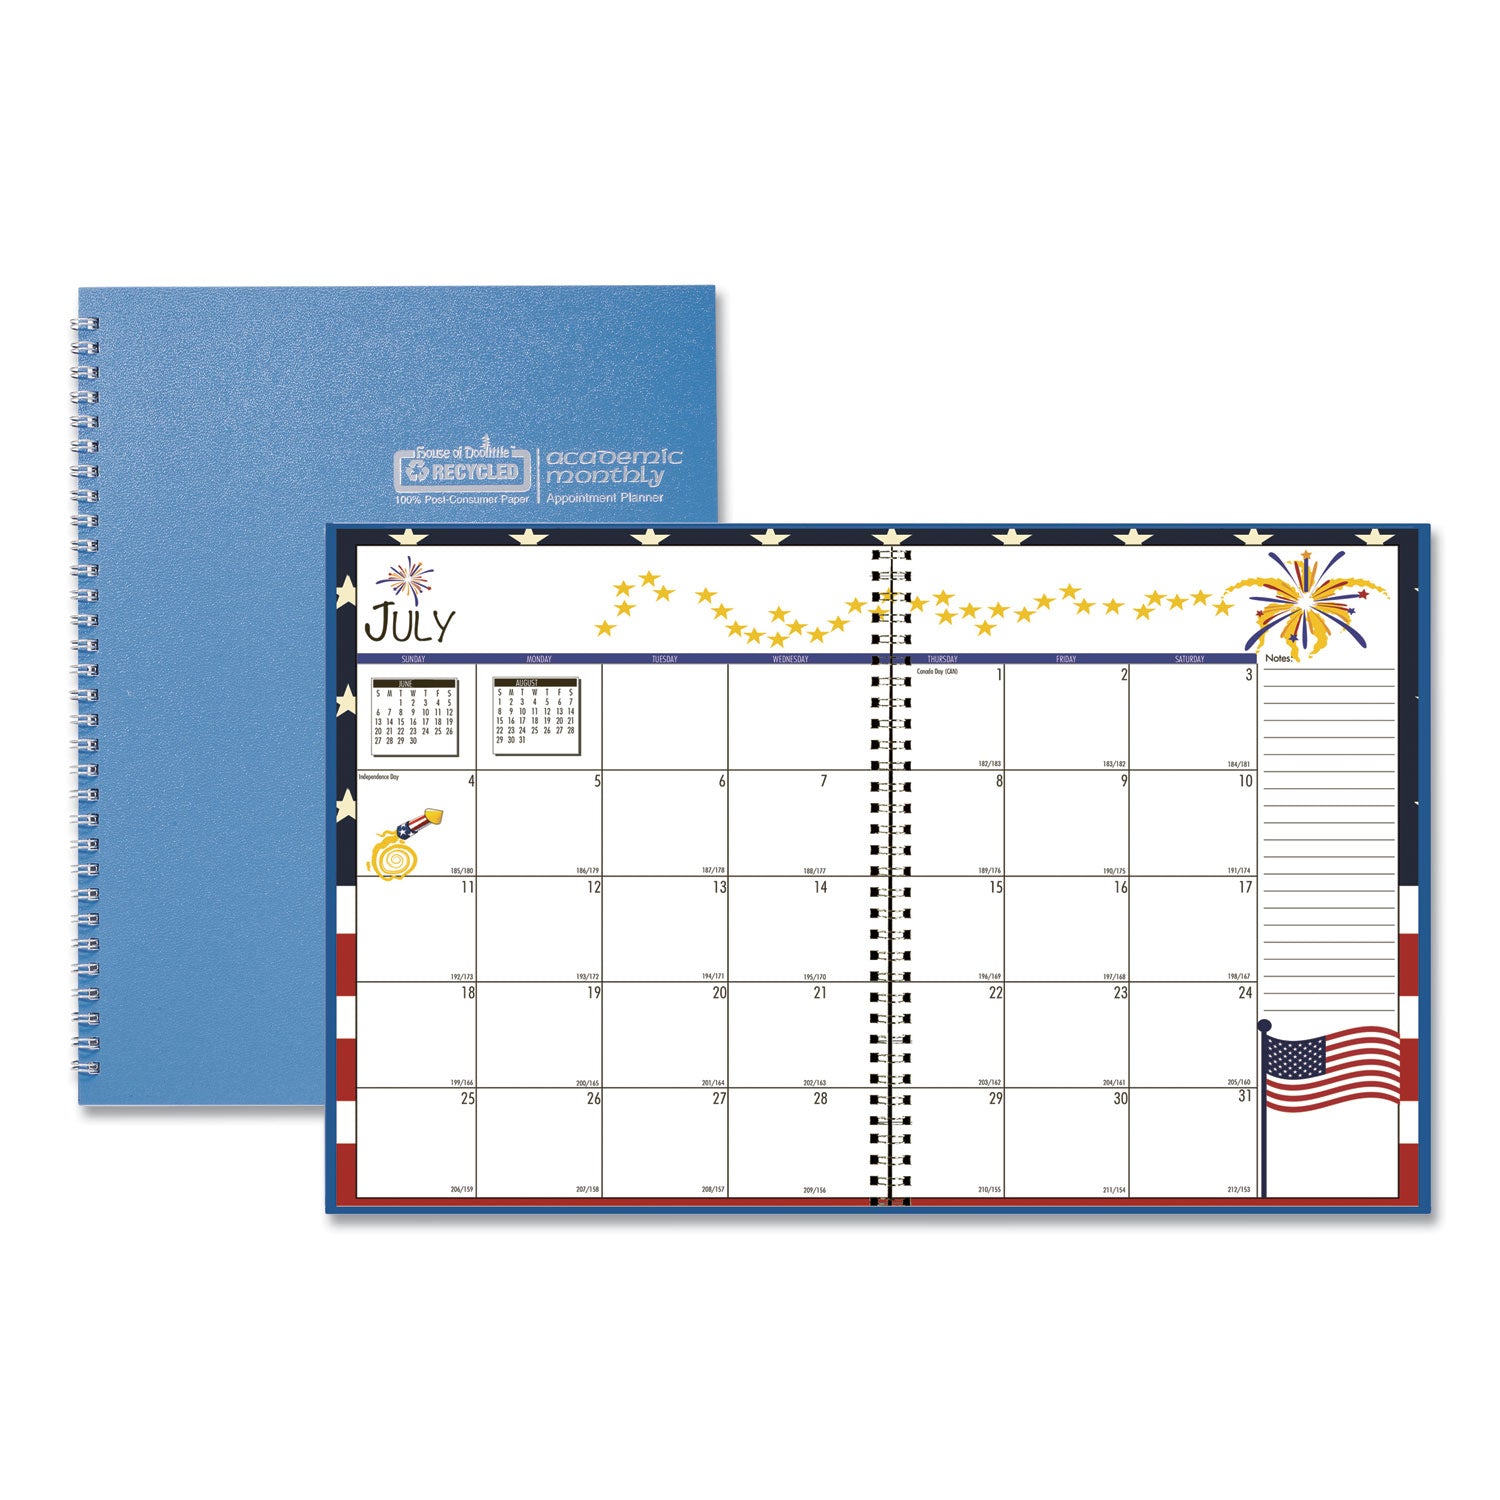 seasonal-monthly-planner-seasonal-artwork-10-x-7-light-blue-cover-12-month-july-to-june-2022-to-2023_hod239508 - 1